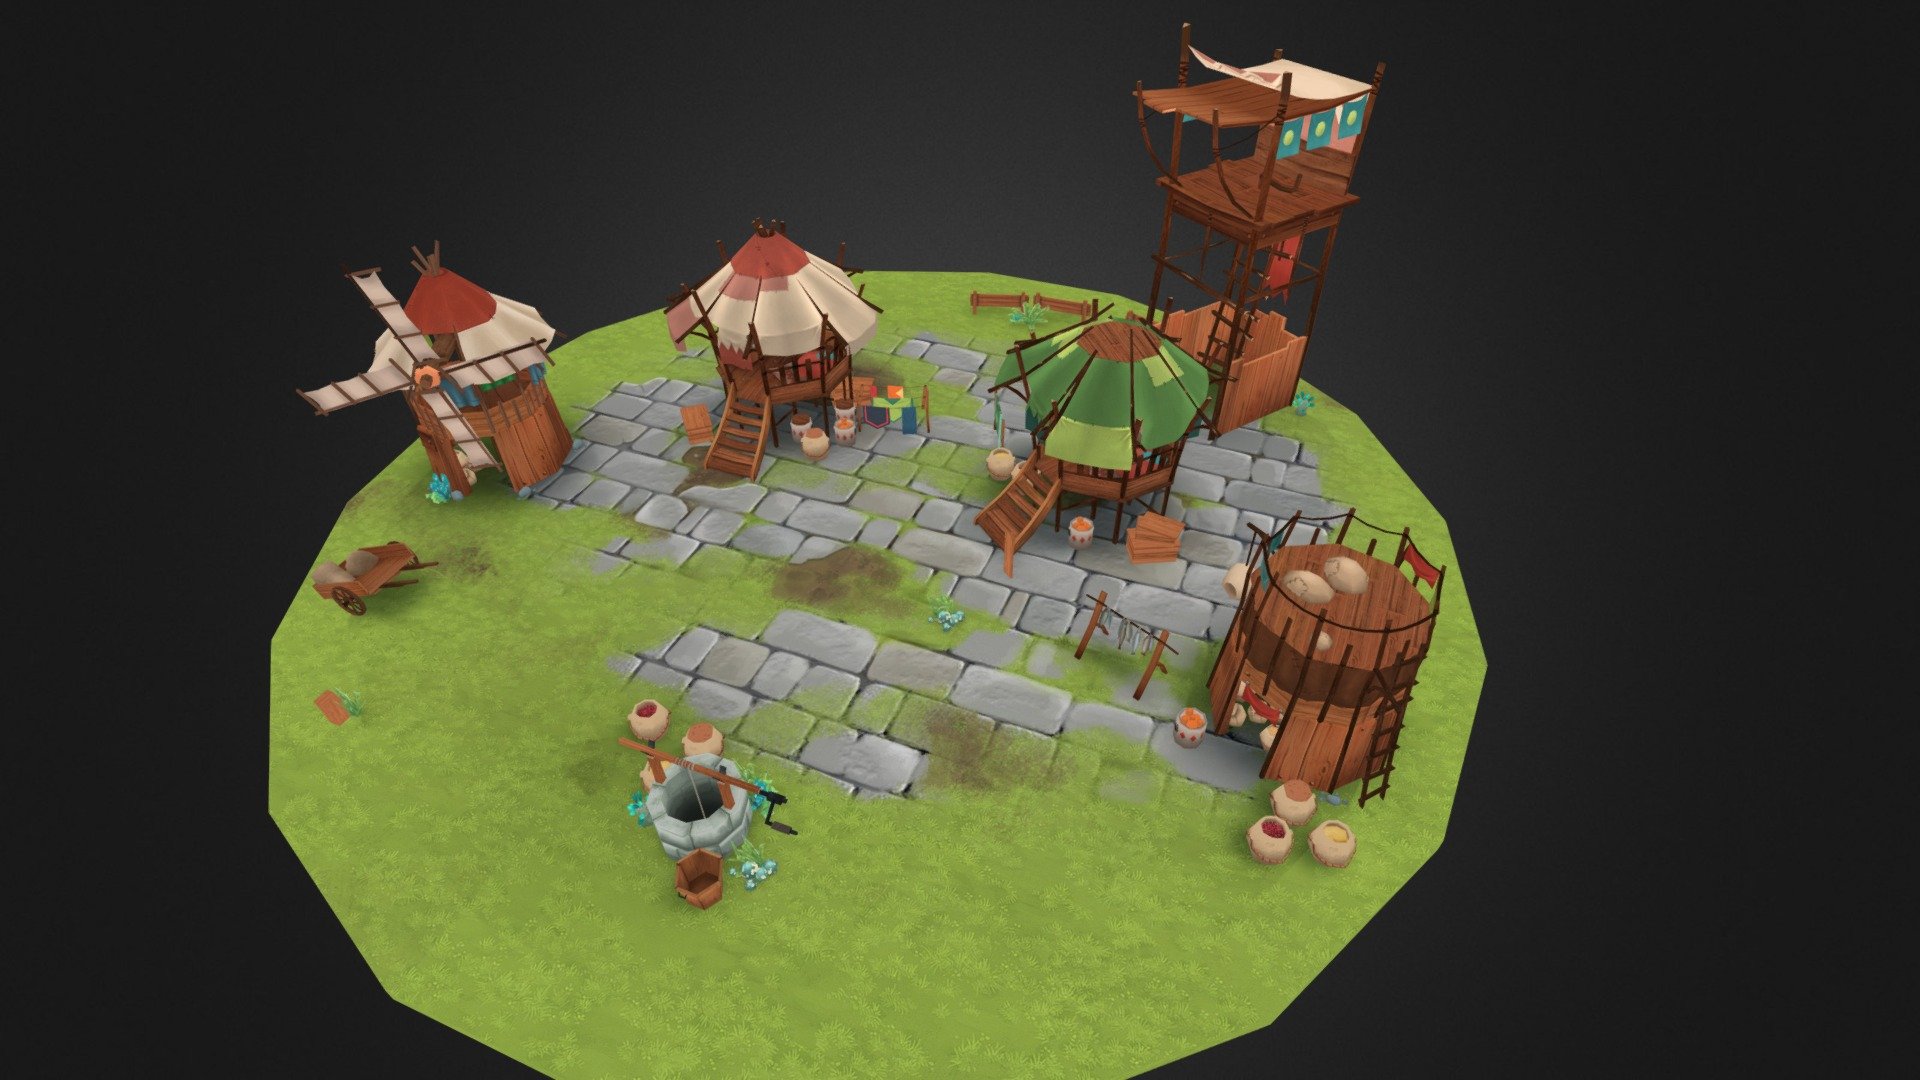 Constraints : low poly, with only a diffuse map (and less alpha possible).
Tools : 3DS max and Photoshop CS5

For Shiro Games - NPC's Village - 3D model by lucile.lacoste 3d model